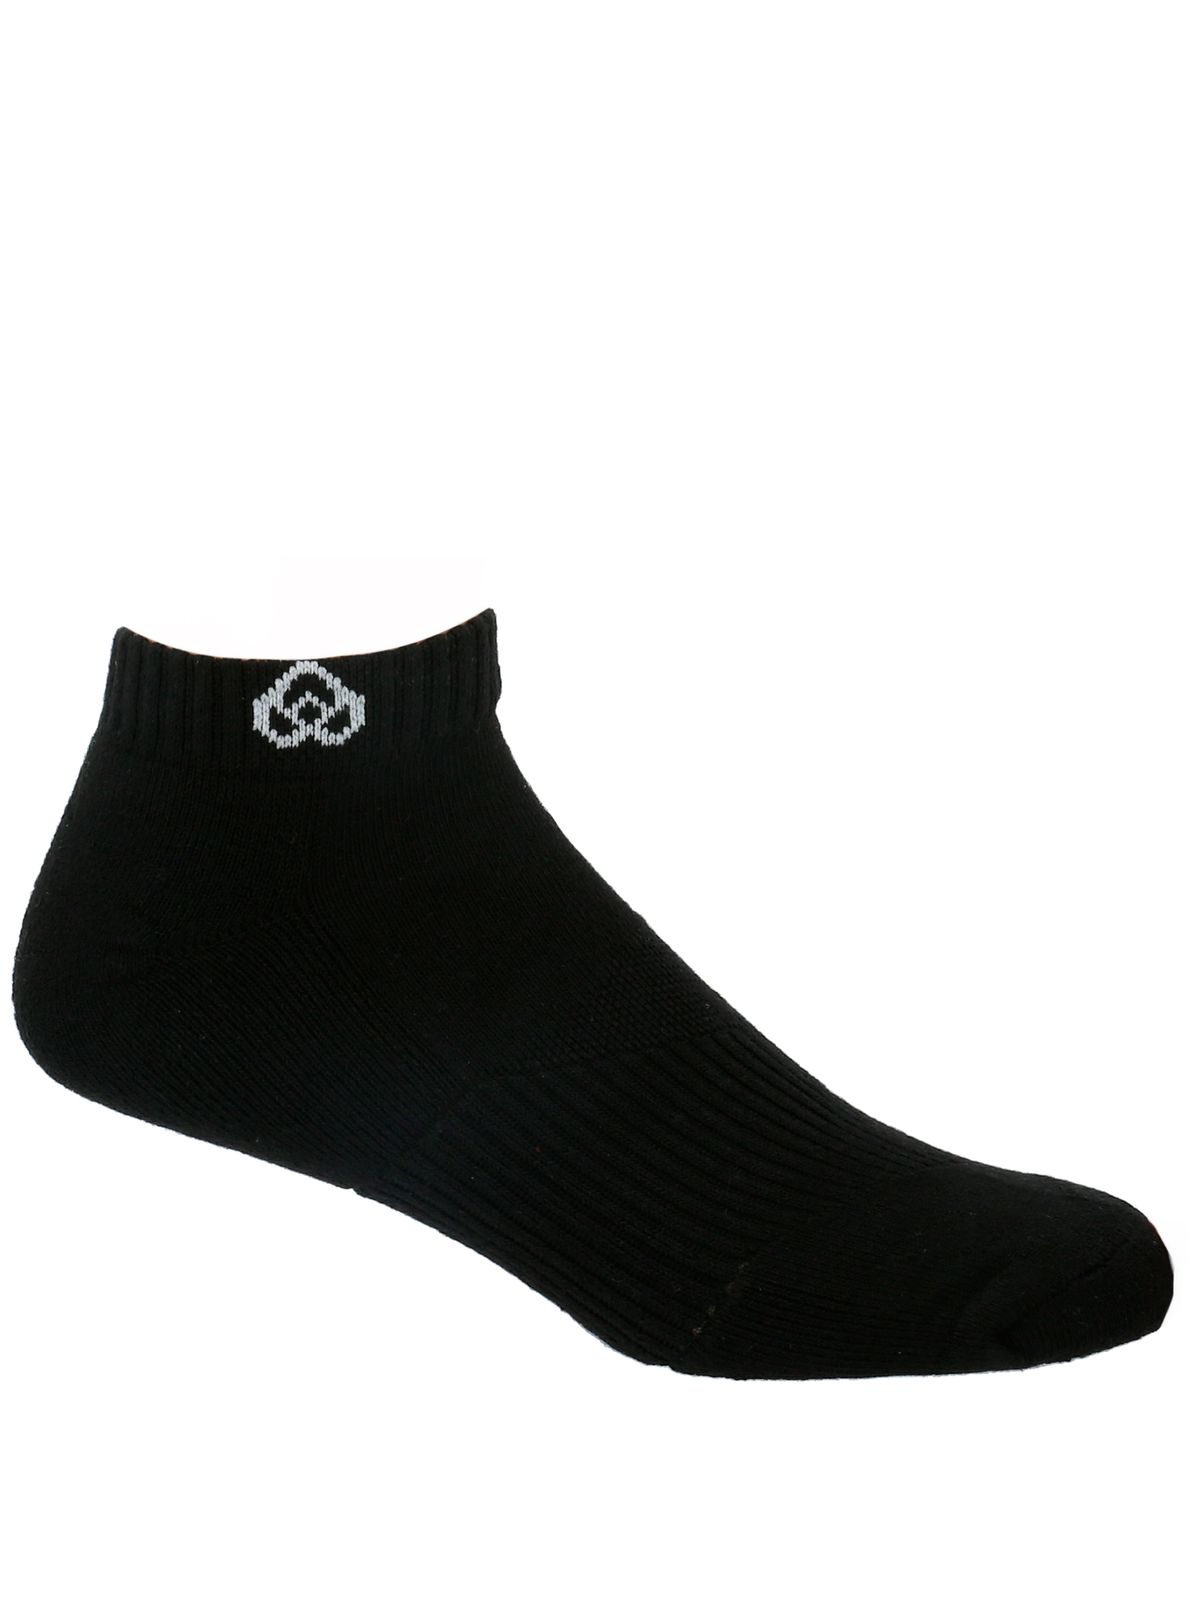 Pack 6 Calcetines Hombre Low Cut Recycl